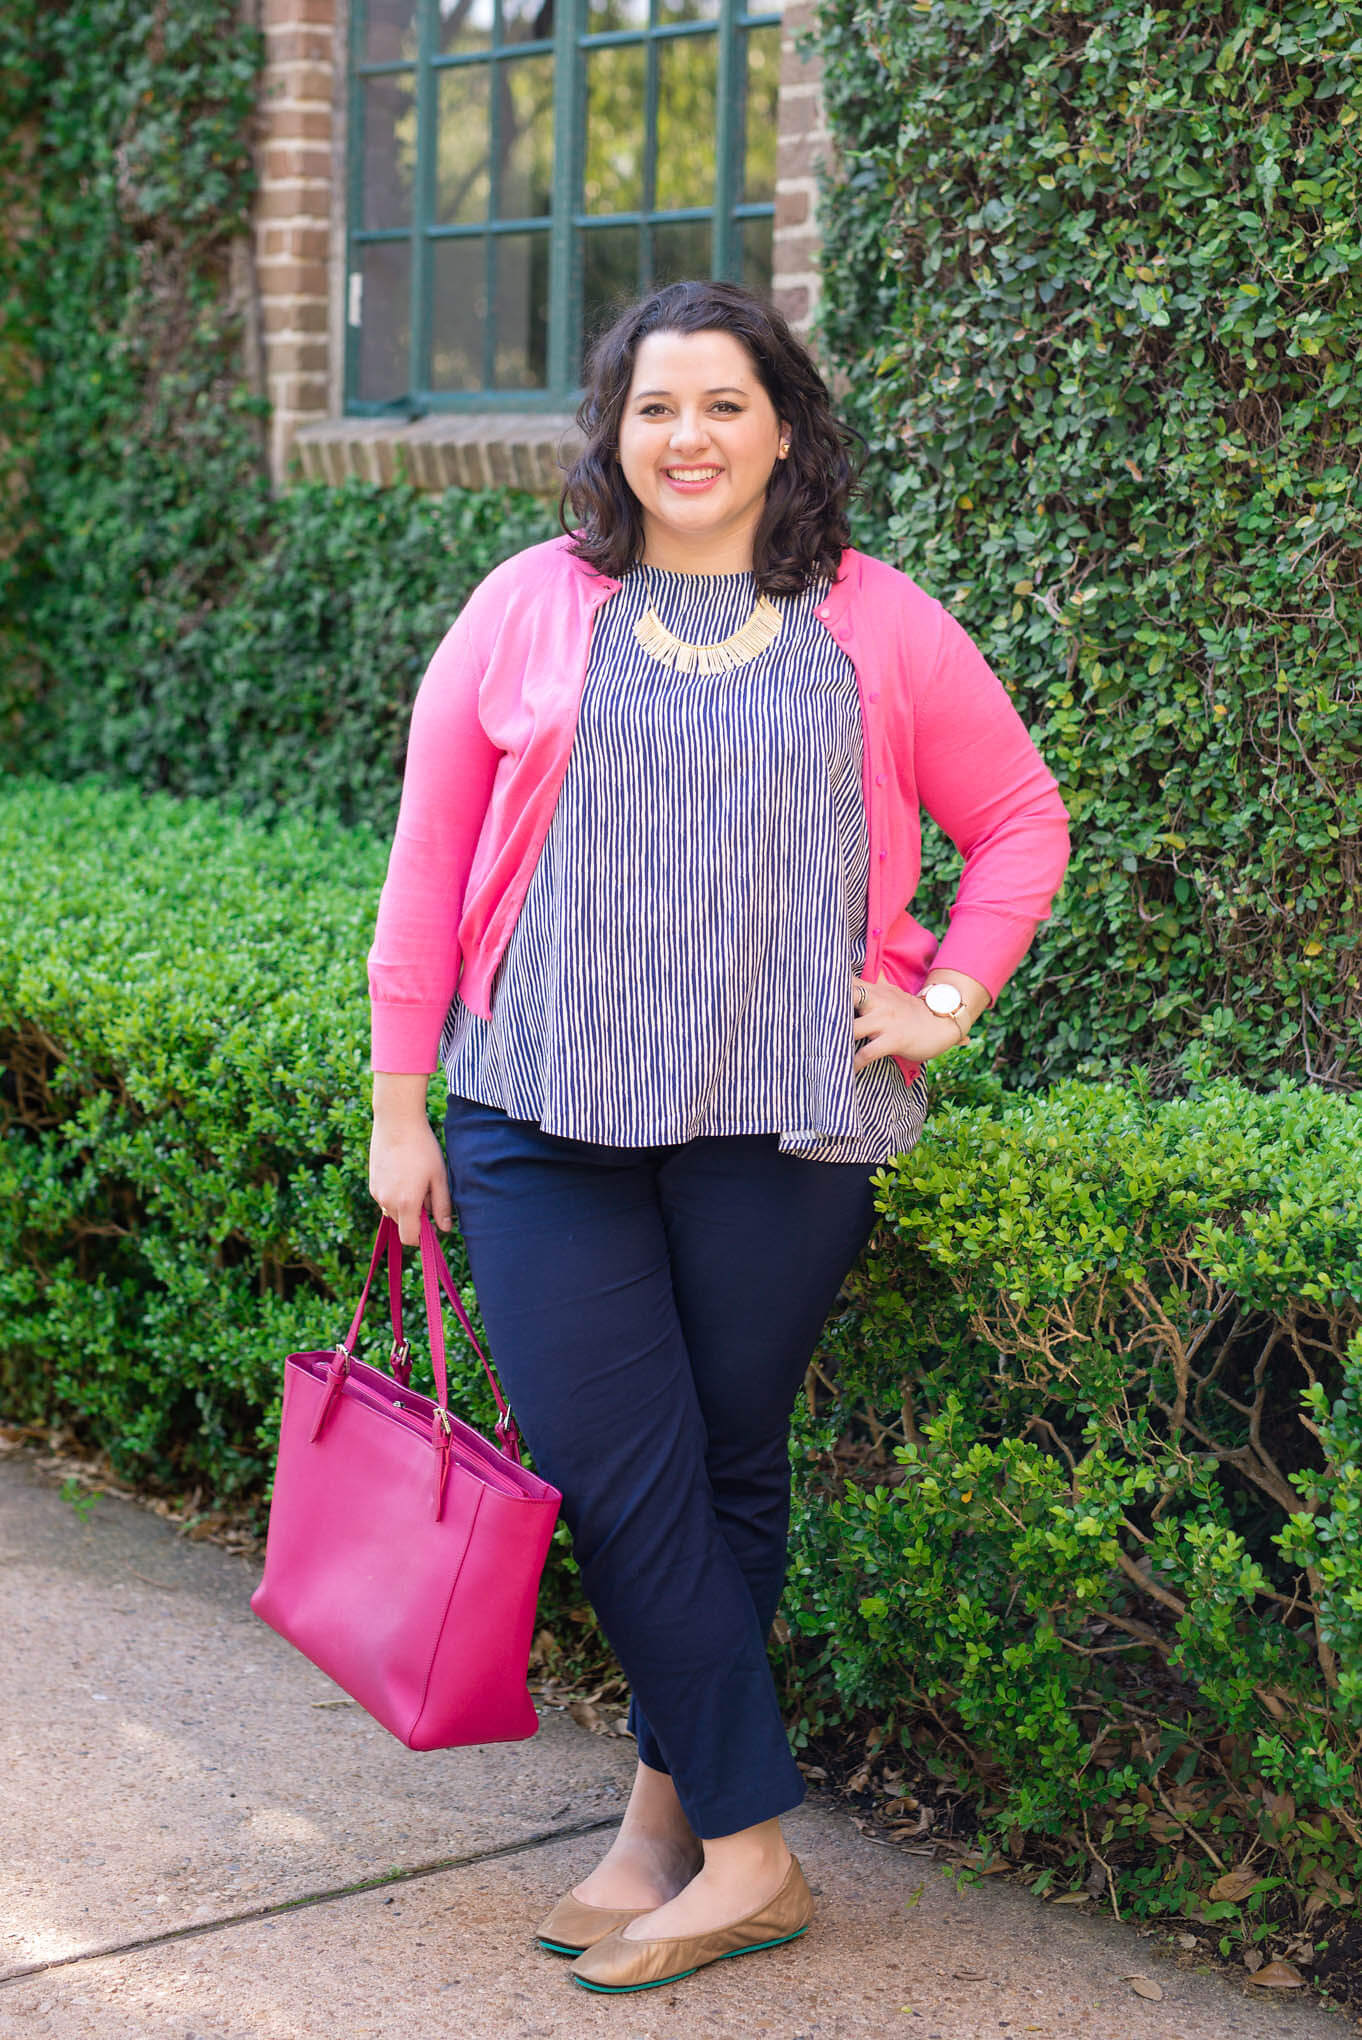 Spring Business Casual - Something Gold, Something Blue fashion blog - Colorful cardigans, navy pants, colorful totes and Tieks ballet flats make for the perfect work outfit